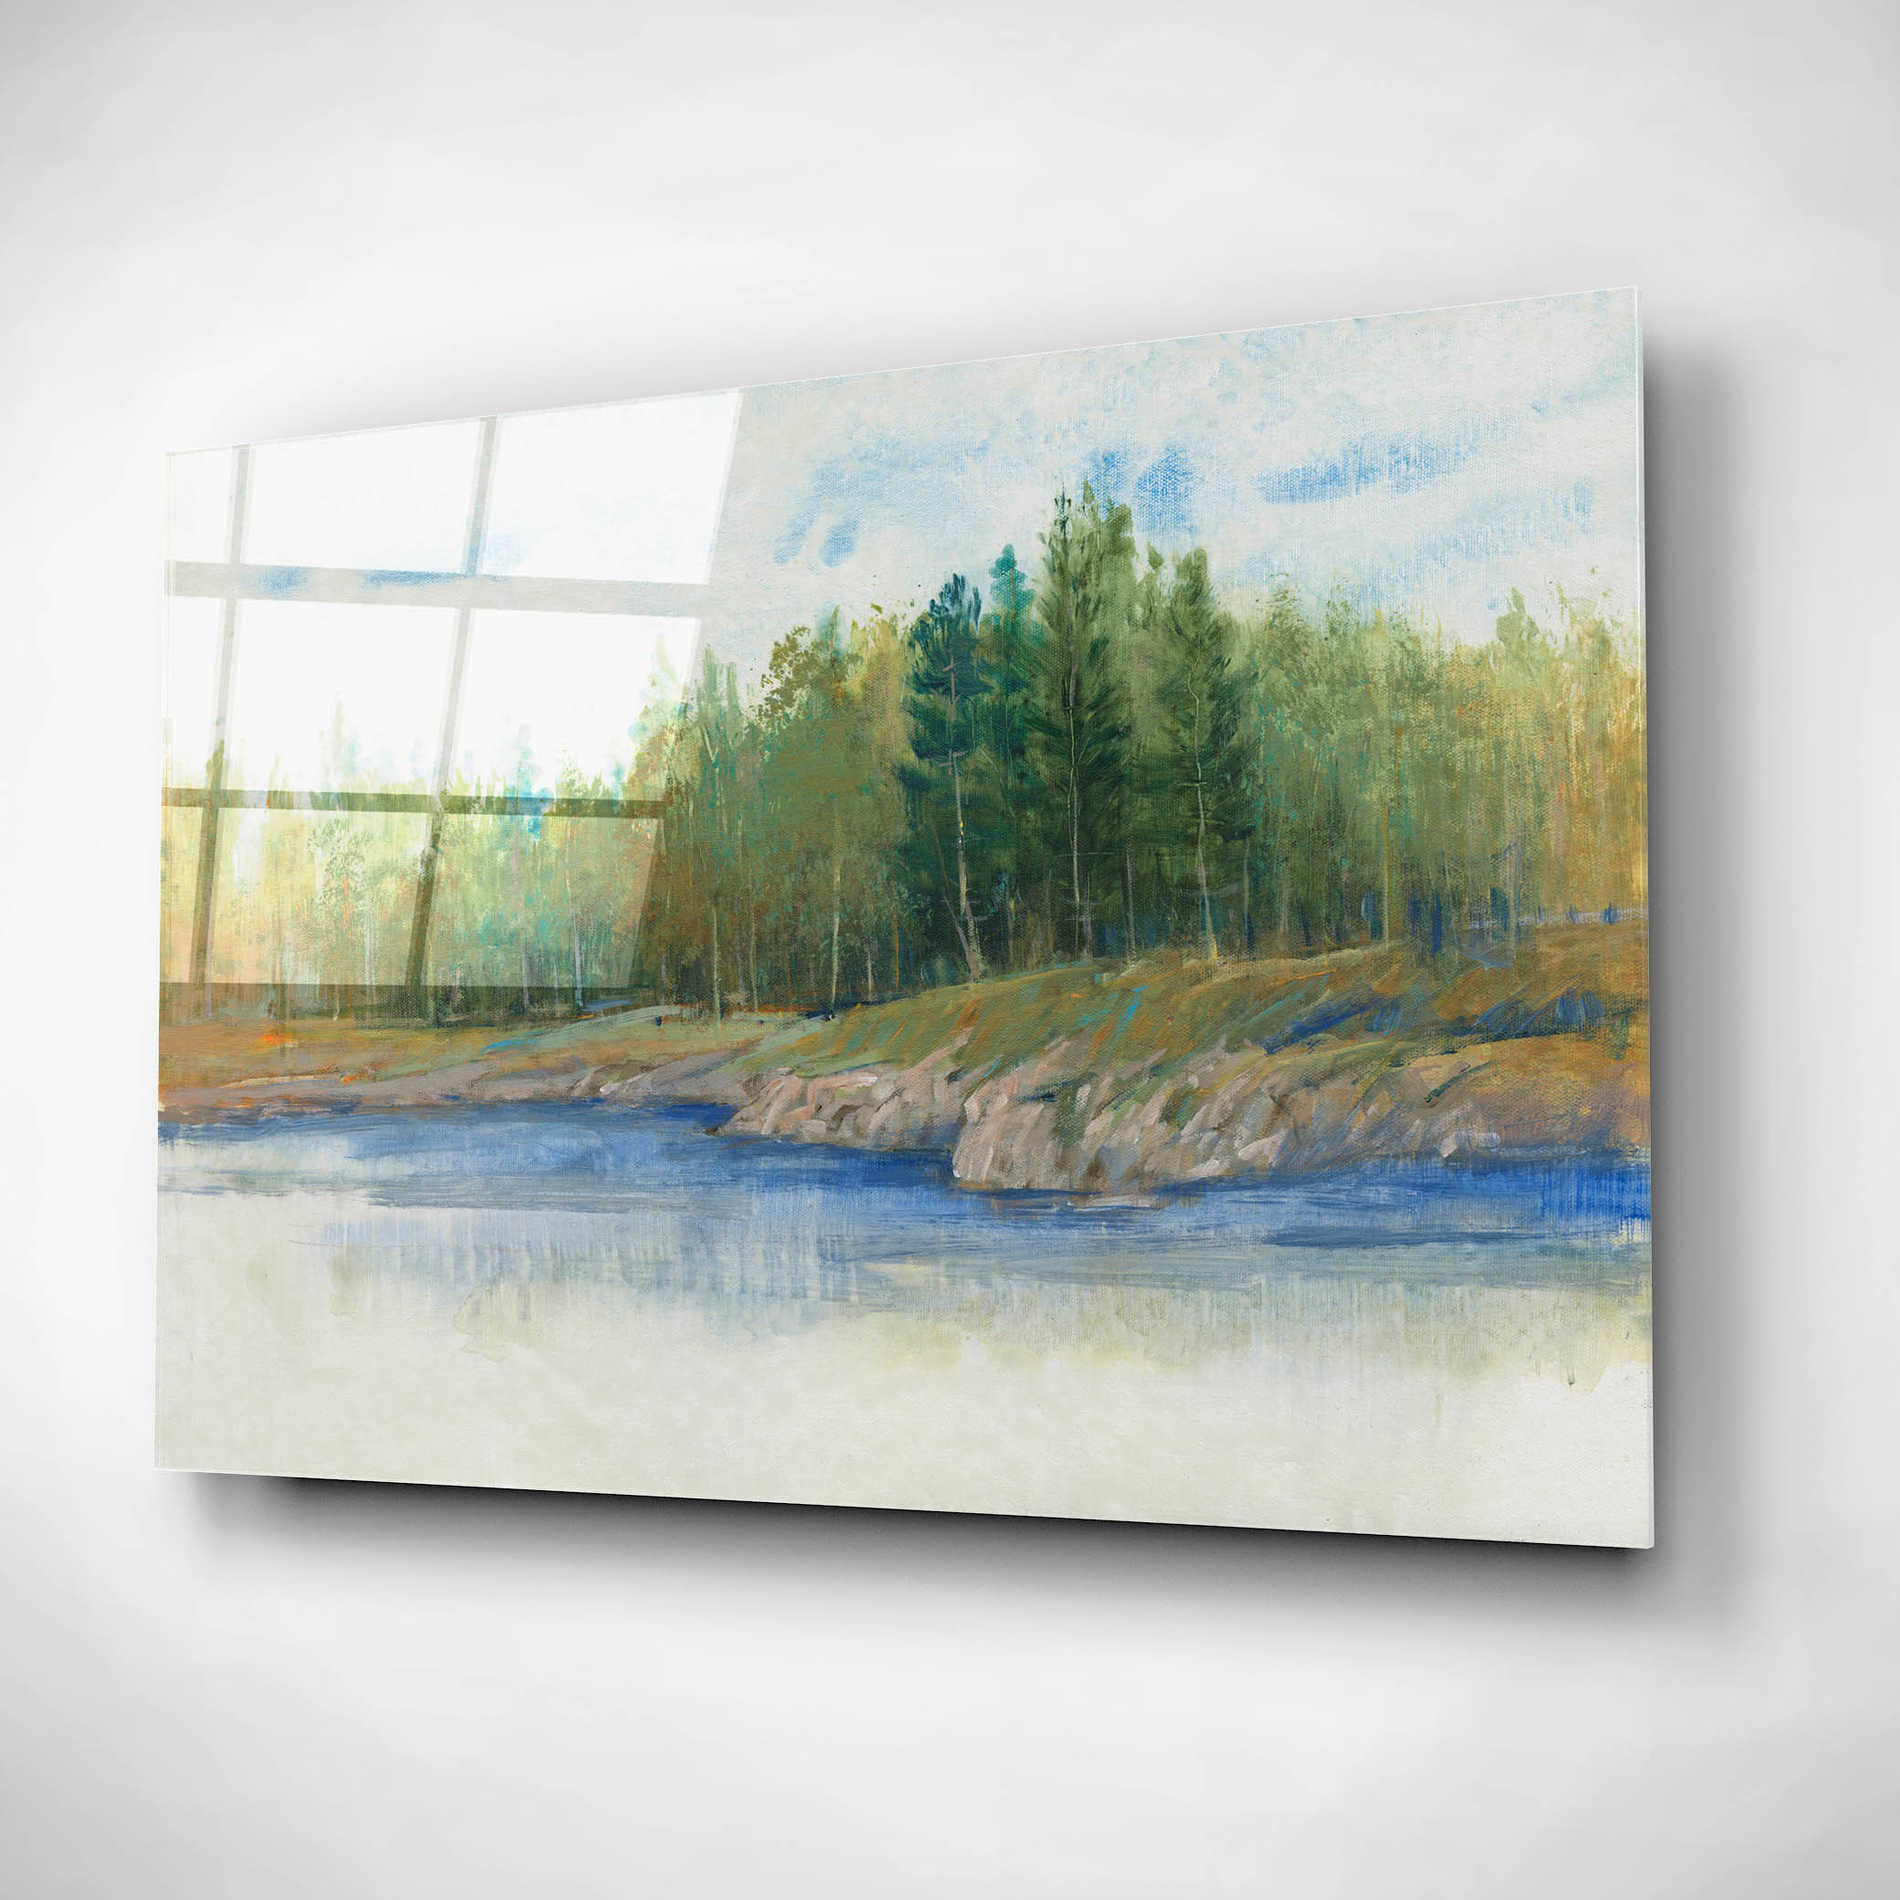 Epic Art 'From the Banks II' by Tim O'Toole, Acrylic Glass Wall Art,24x16